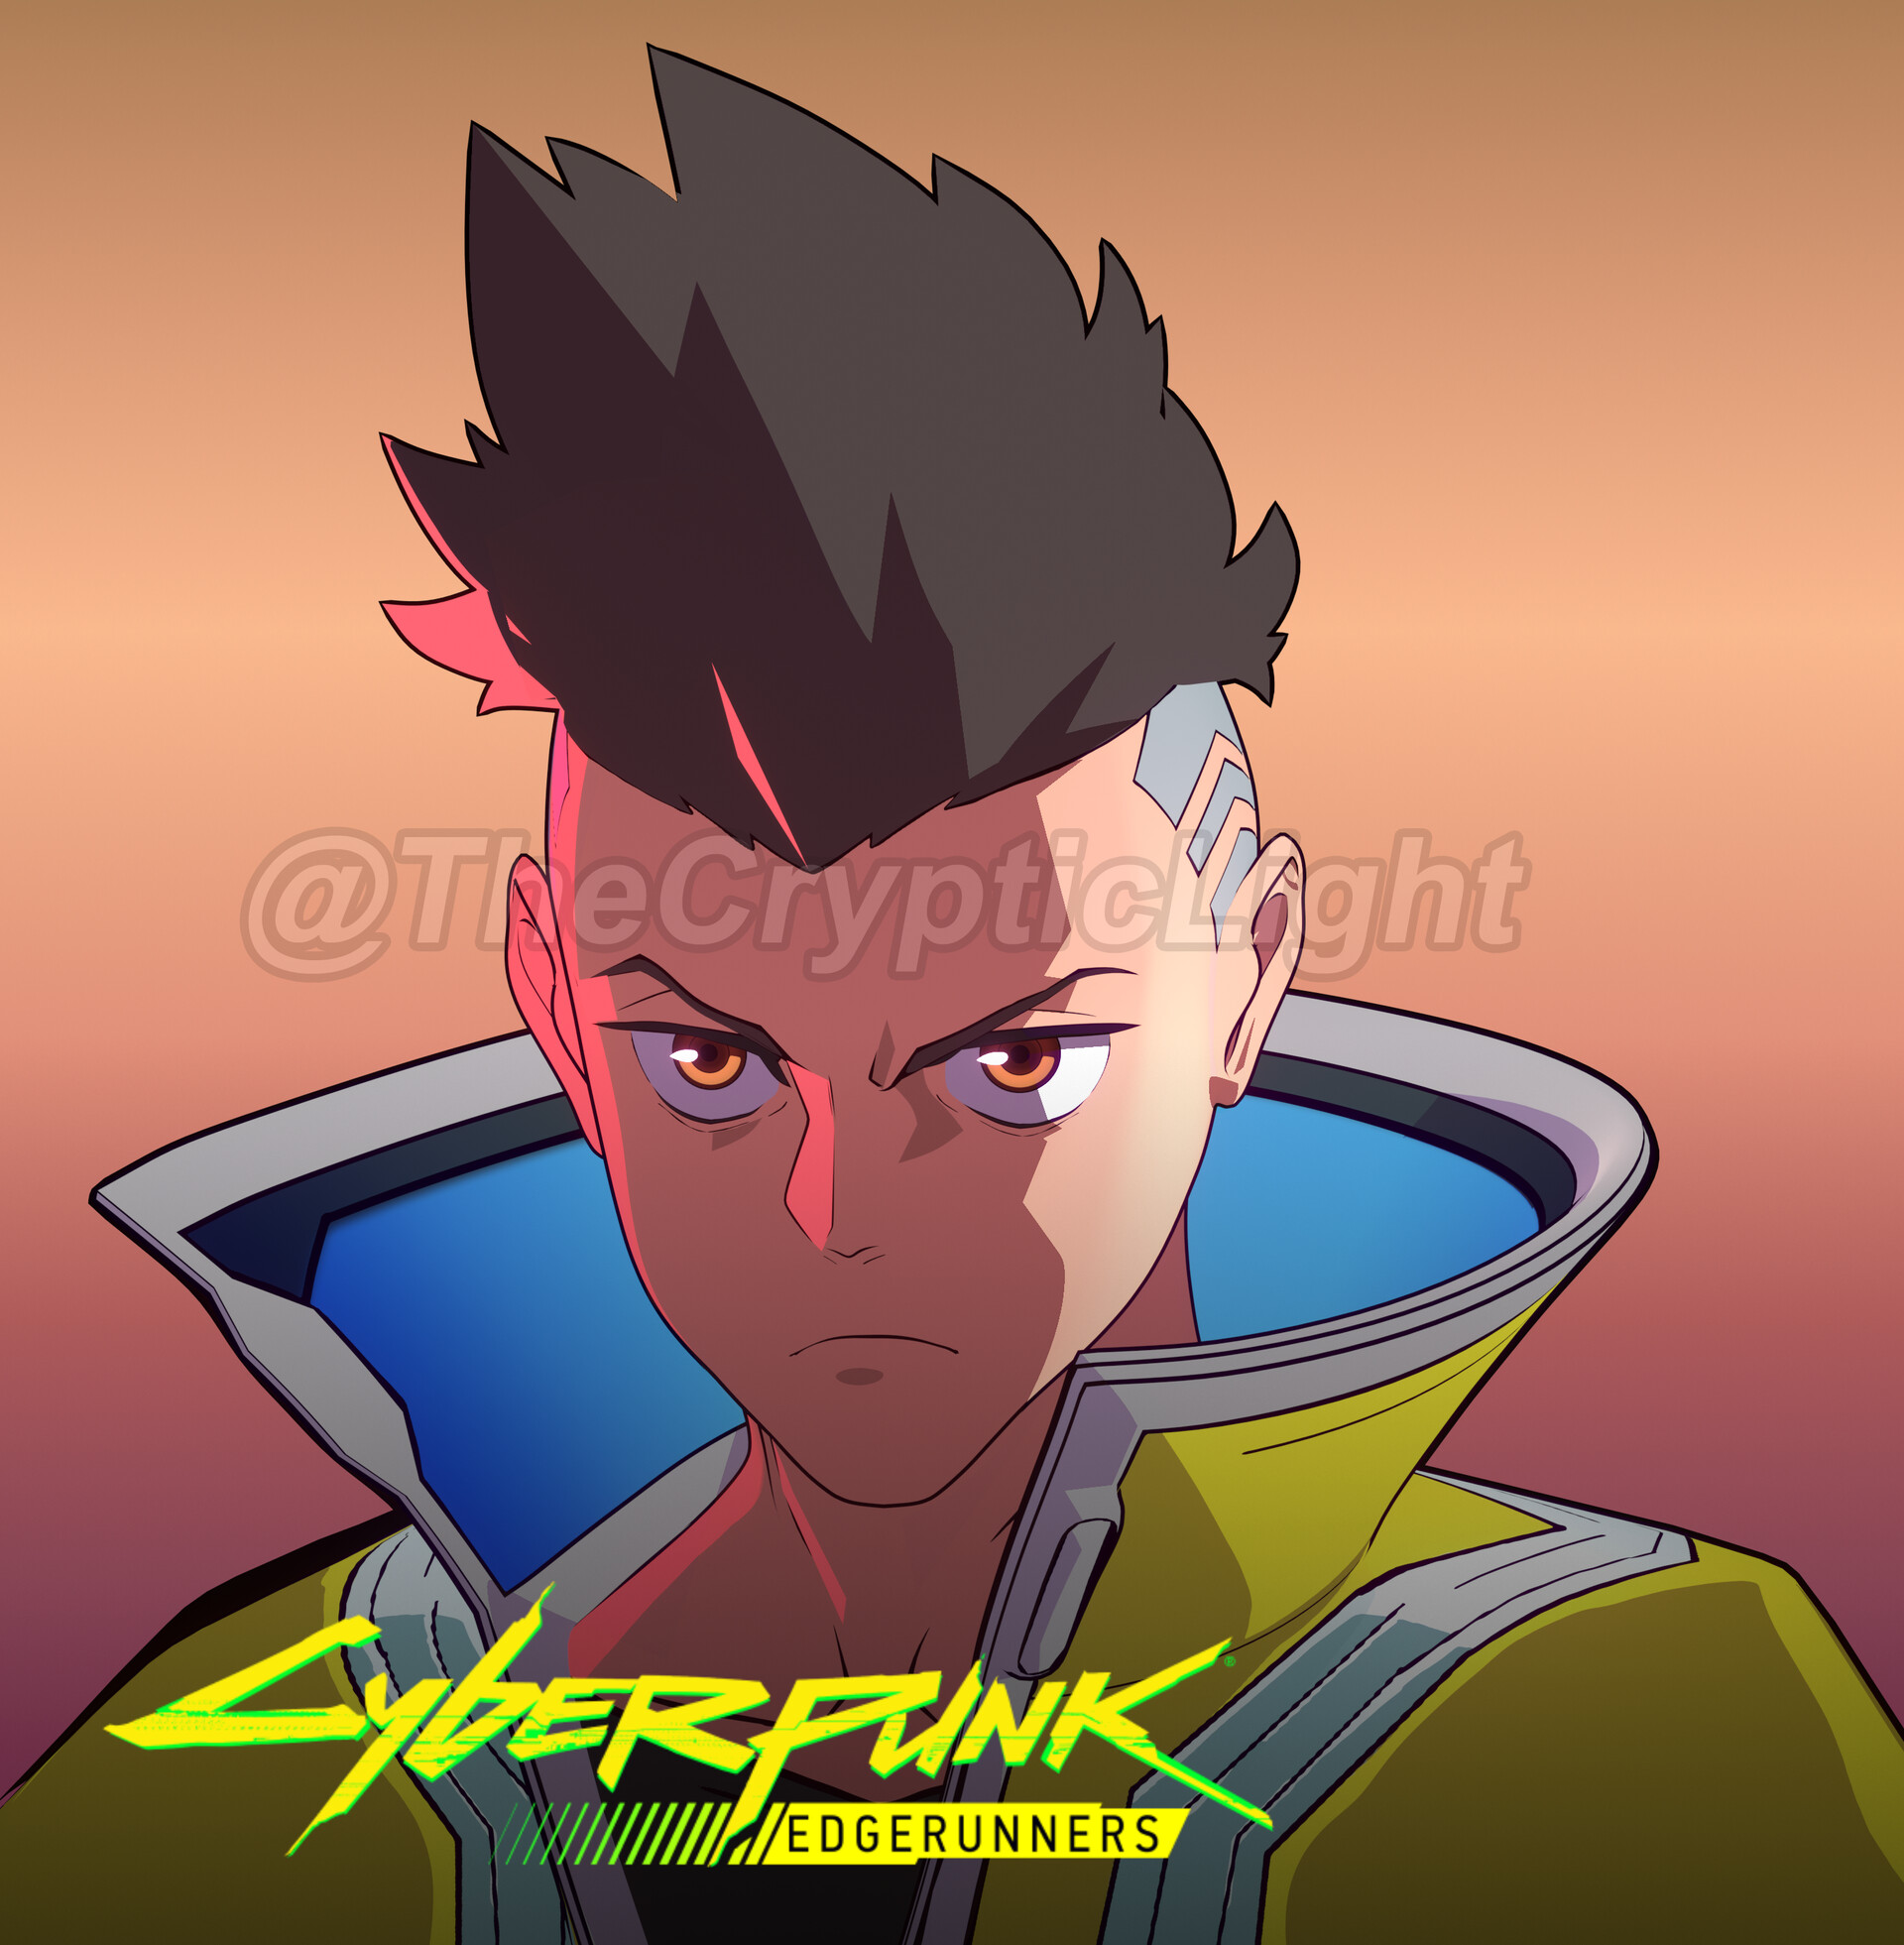 David's face on early Cyberpunk Edgerunners wallpaper for our